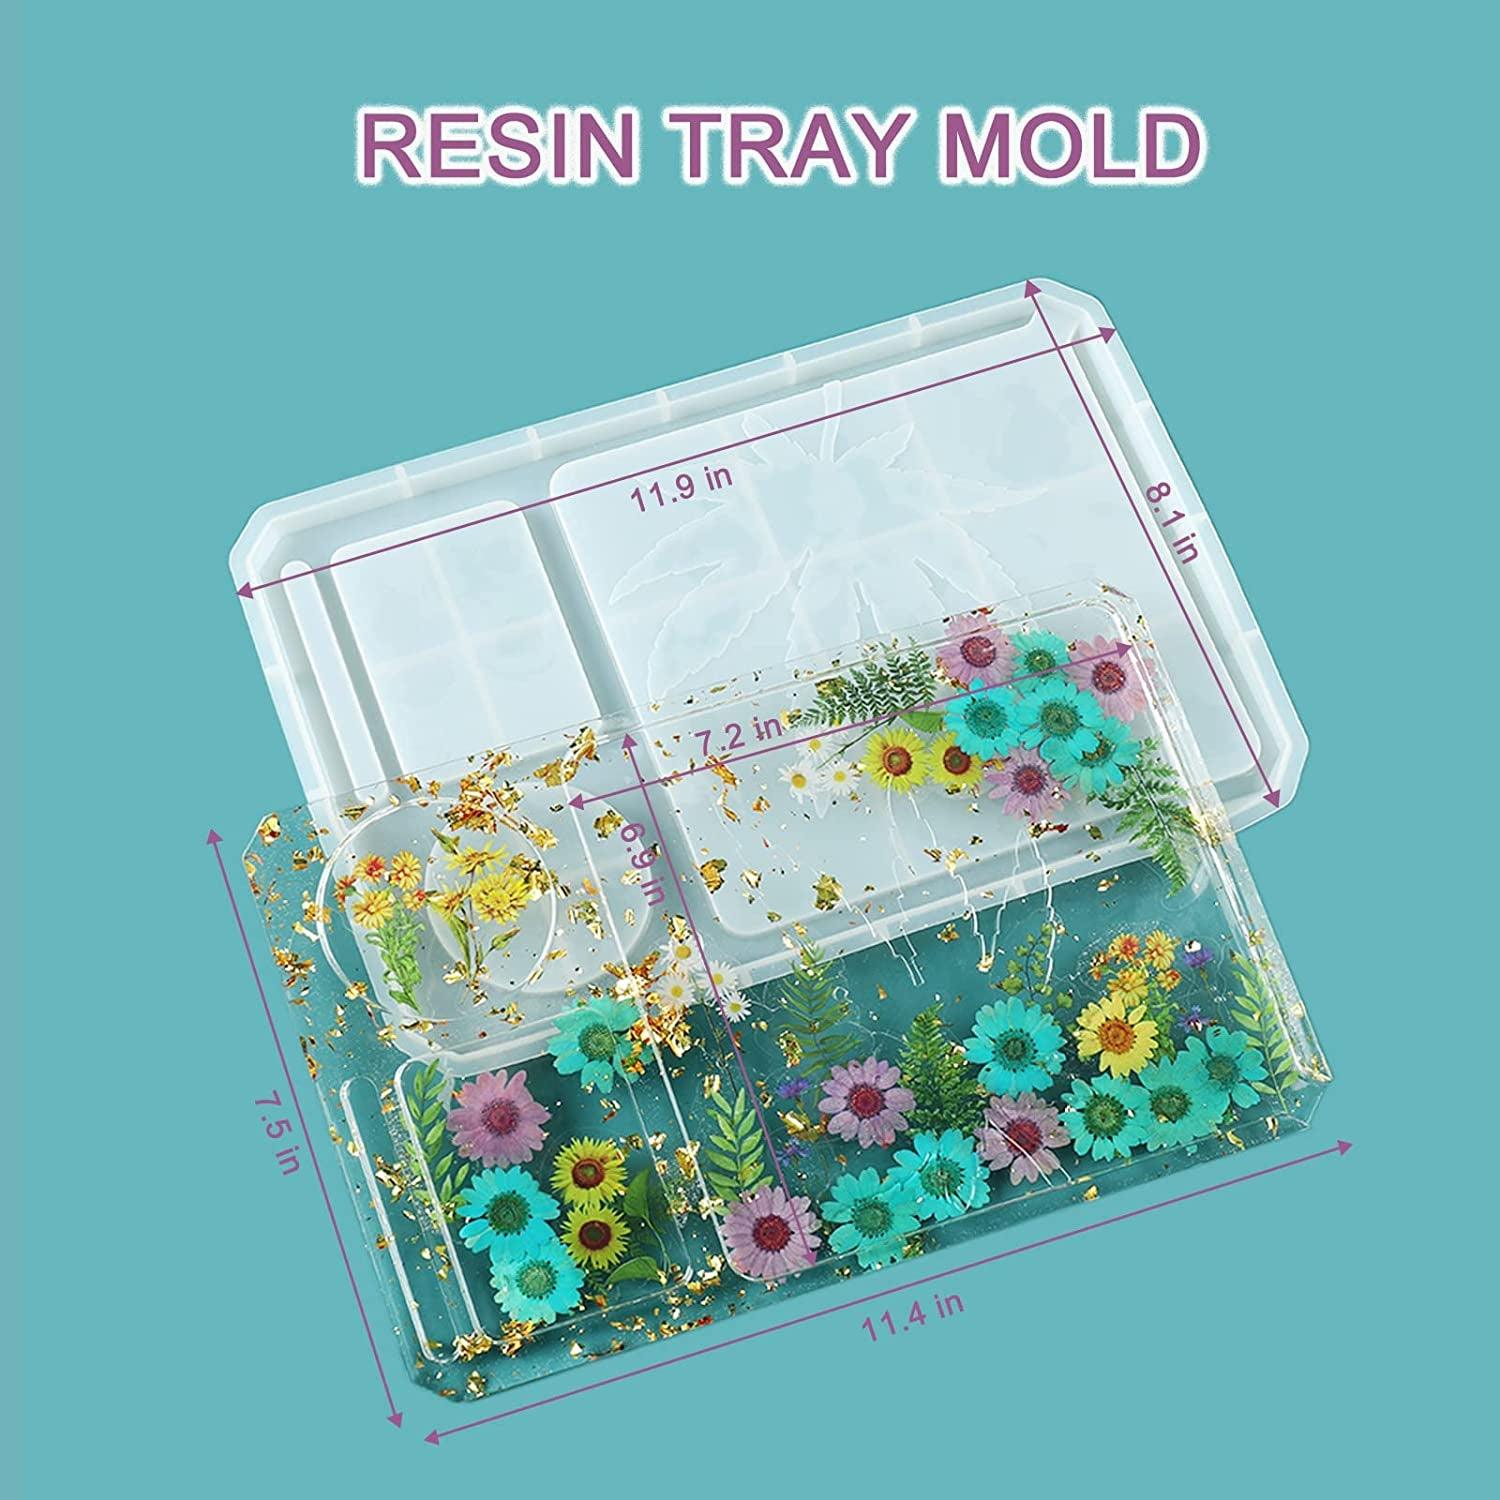 Round Resin Tray Mold Large Rolling Tray Molds With Edges Silicone Mold for  DIY Resin Serving Tray Epoxy Resin Jewelry Holder Art Molds 